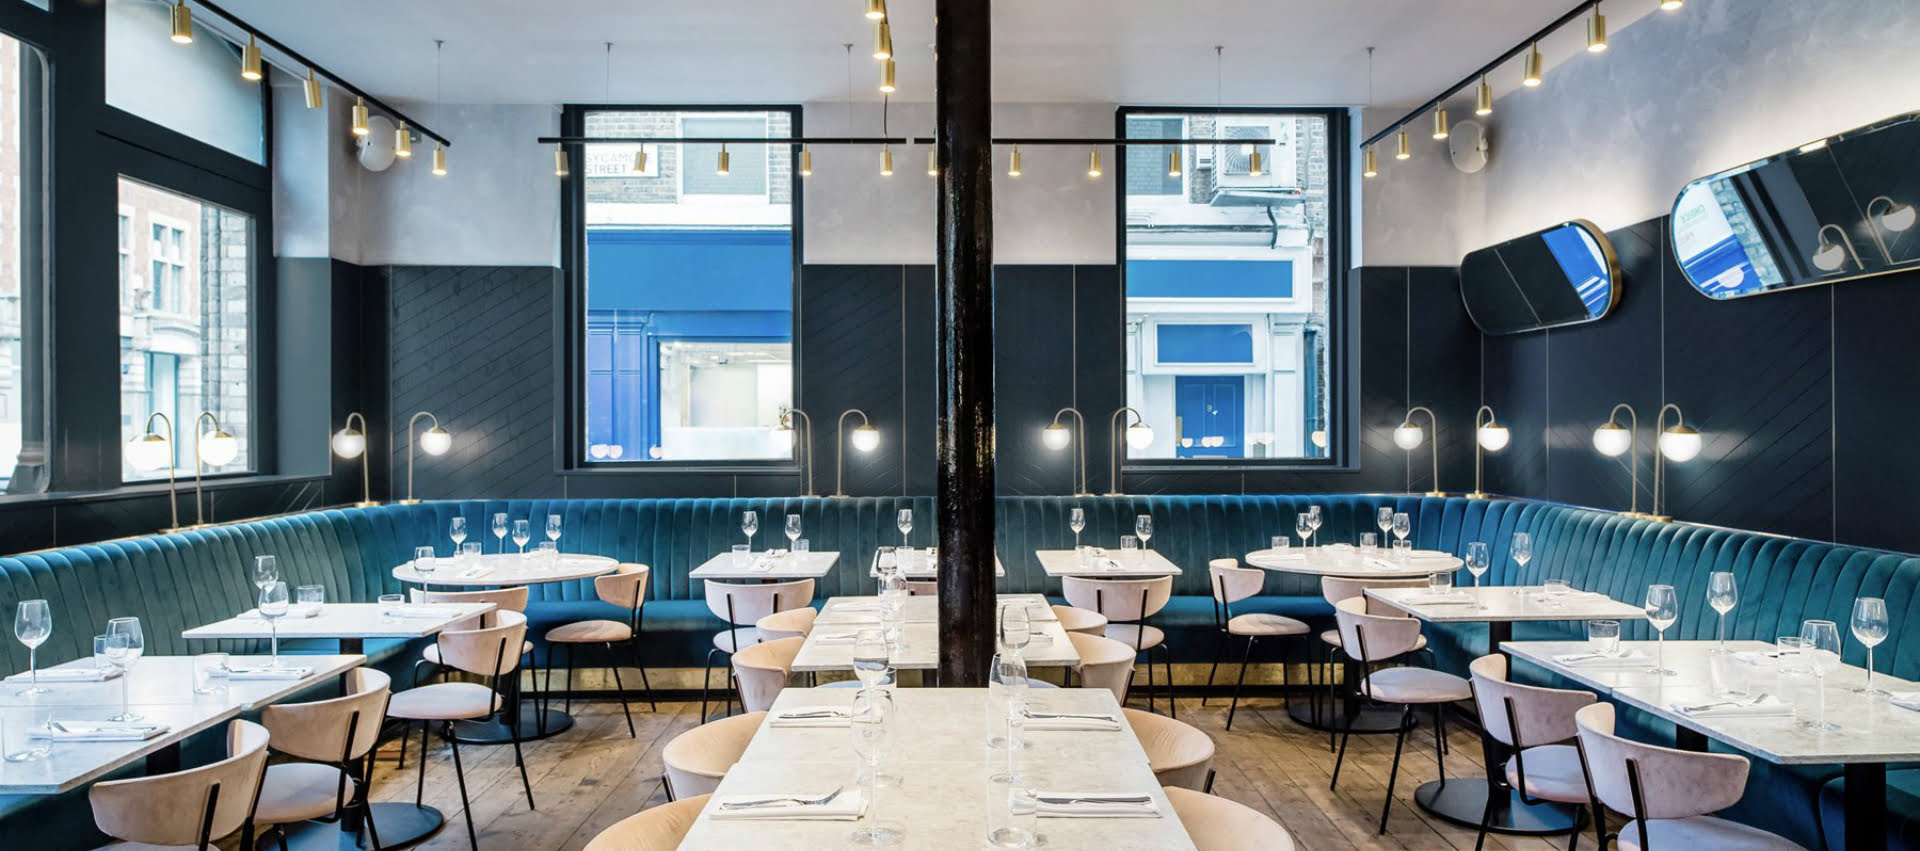 Clerkenwell Grind | A Cafe, Cocktail Bar And Restaurant All In One